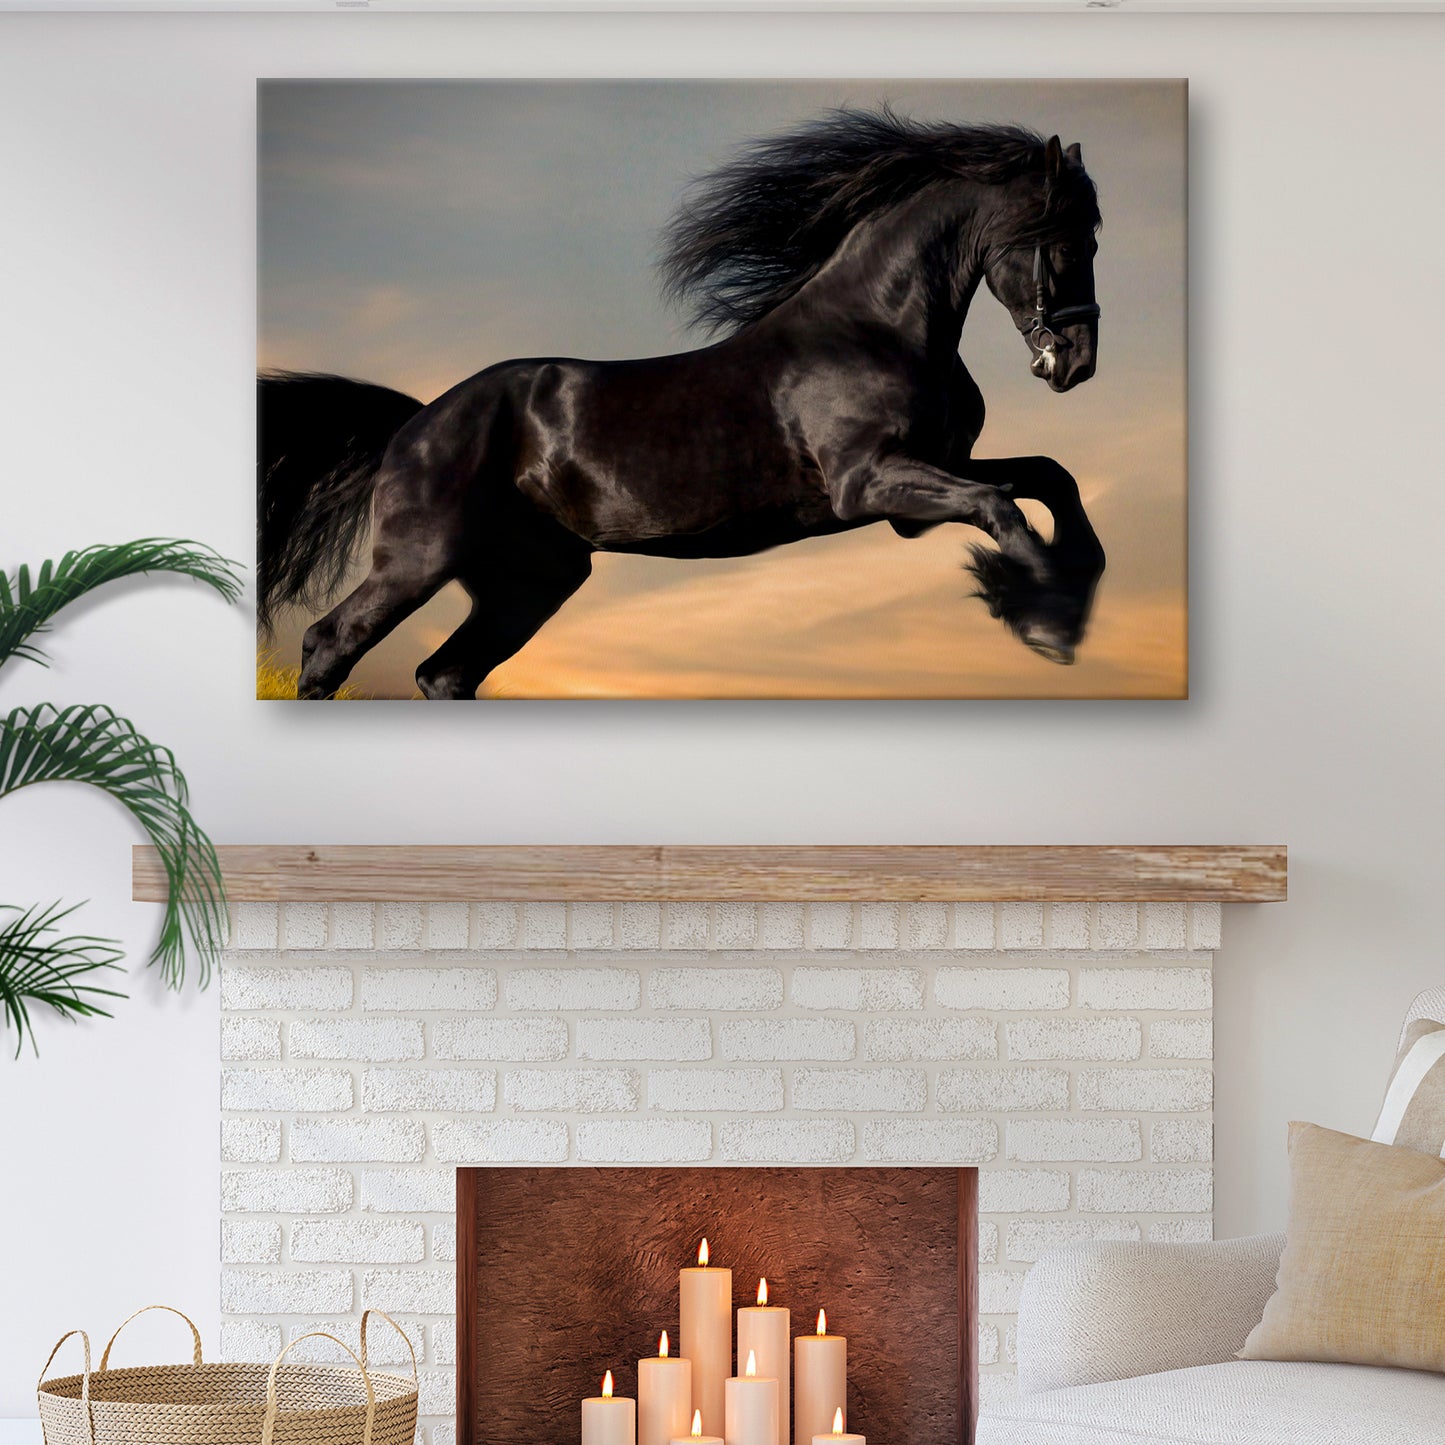 Majestic Black Stallion Canvas Wall Art - Image by Tailored Canvases